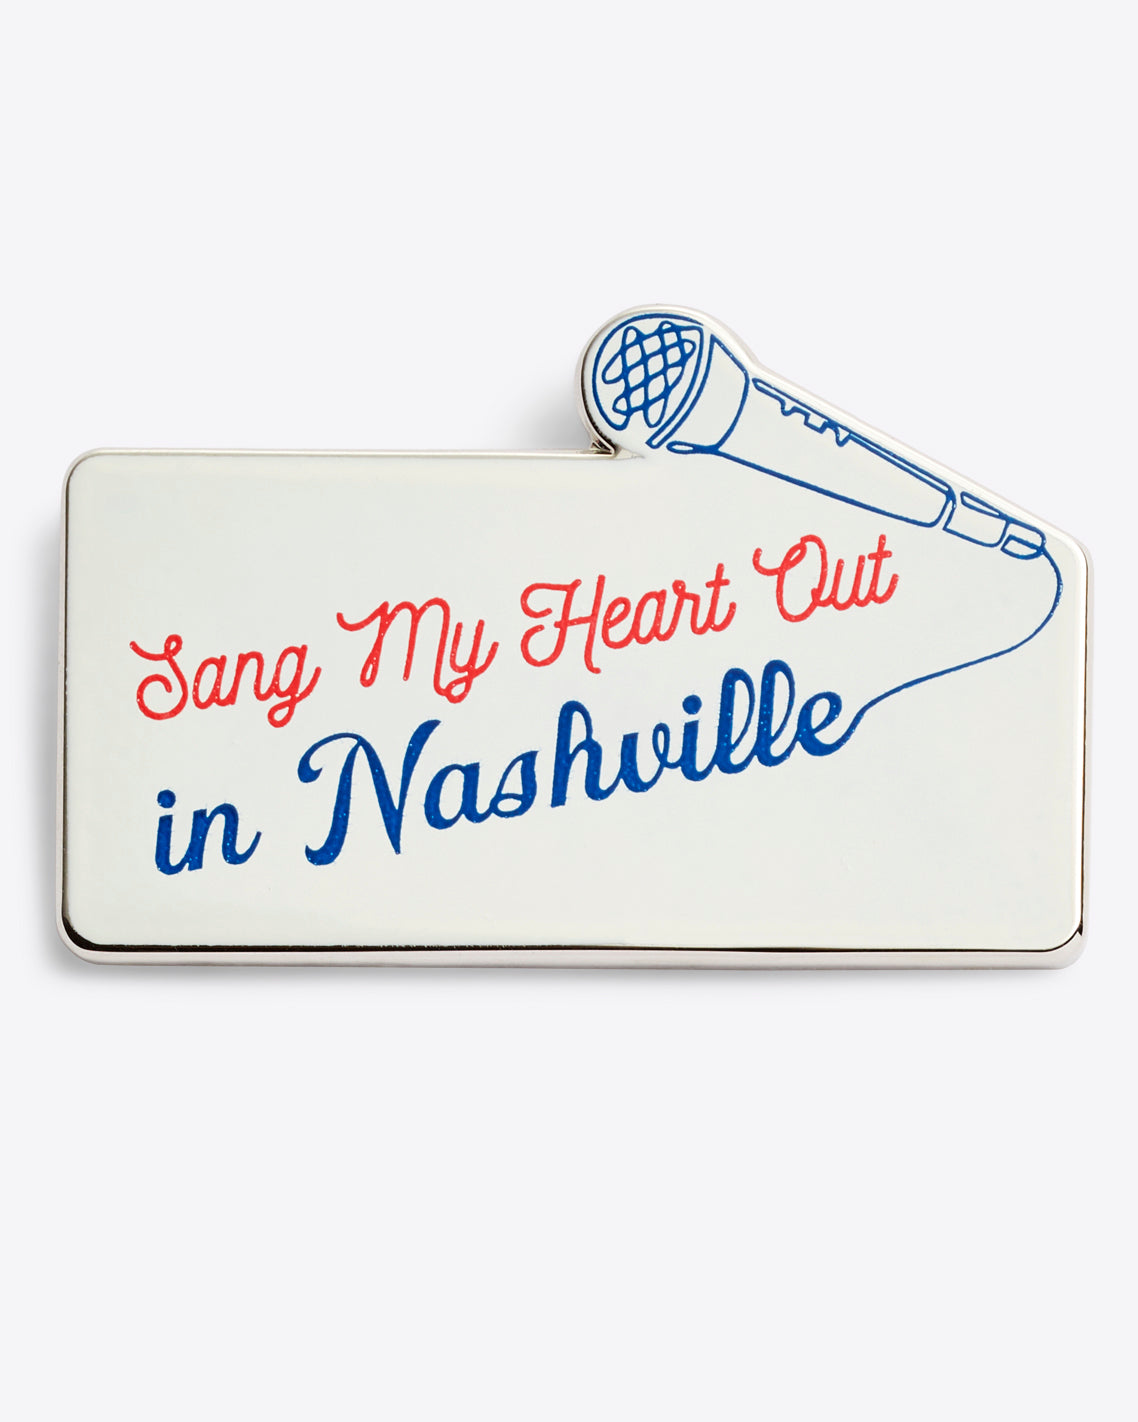 Sang My Heart Out in Nashville Enamel Pin